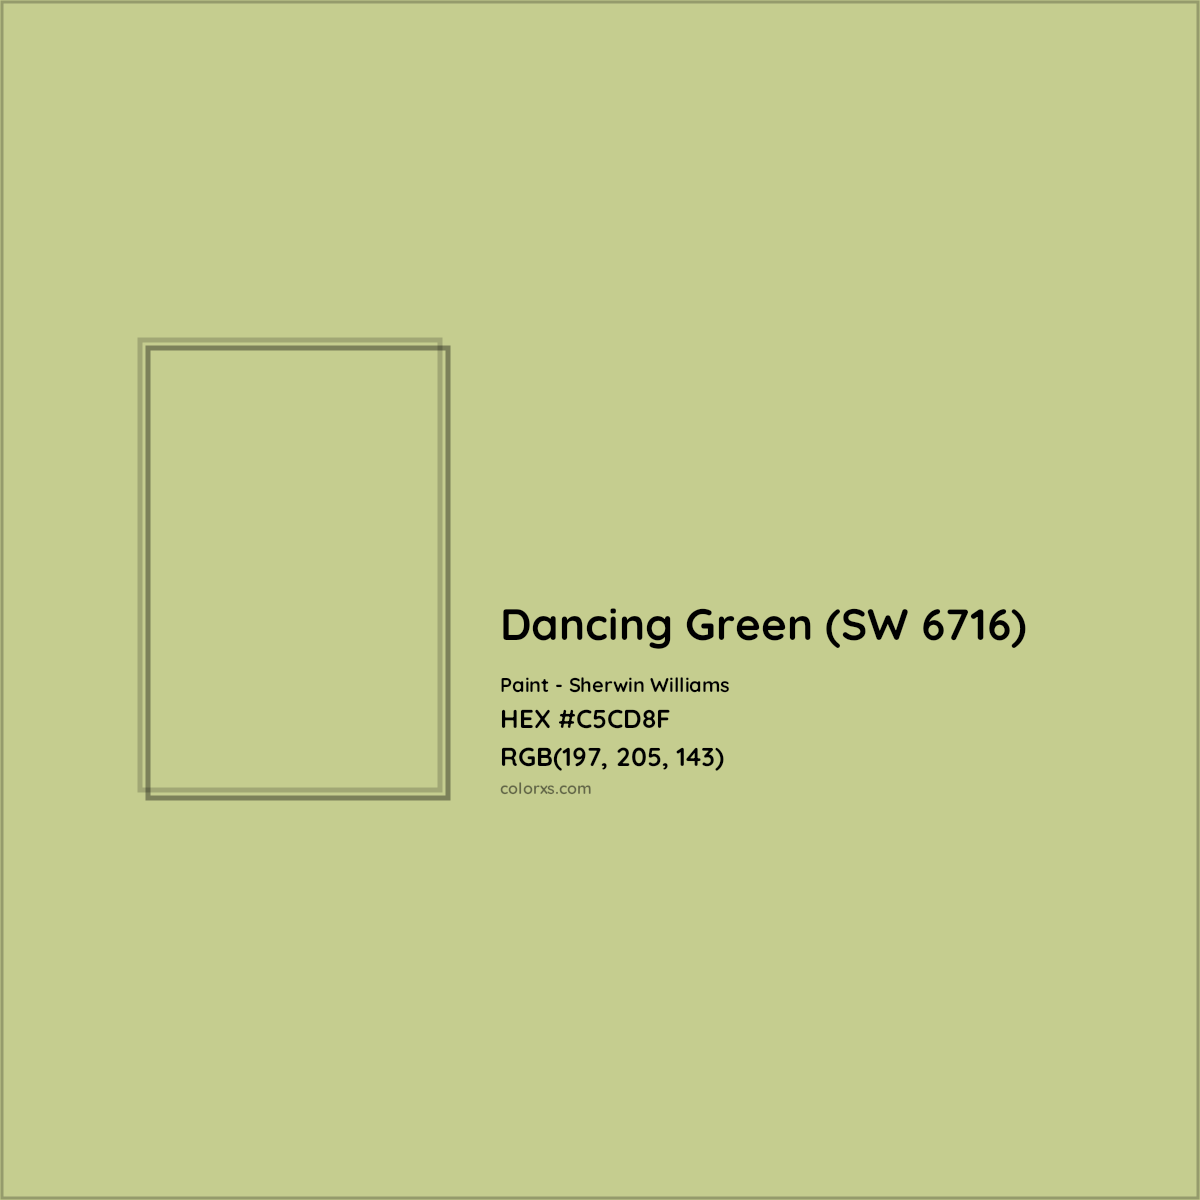 HEX #C5CD8F Dancing Green (SW 6716) Paint Sherwin Williams - Color Code